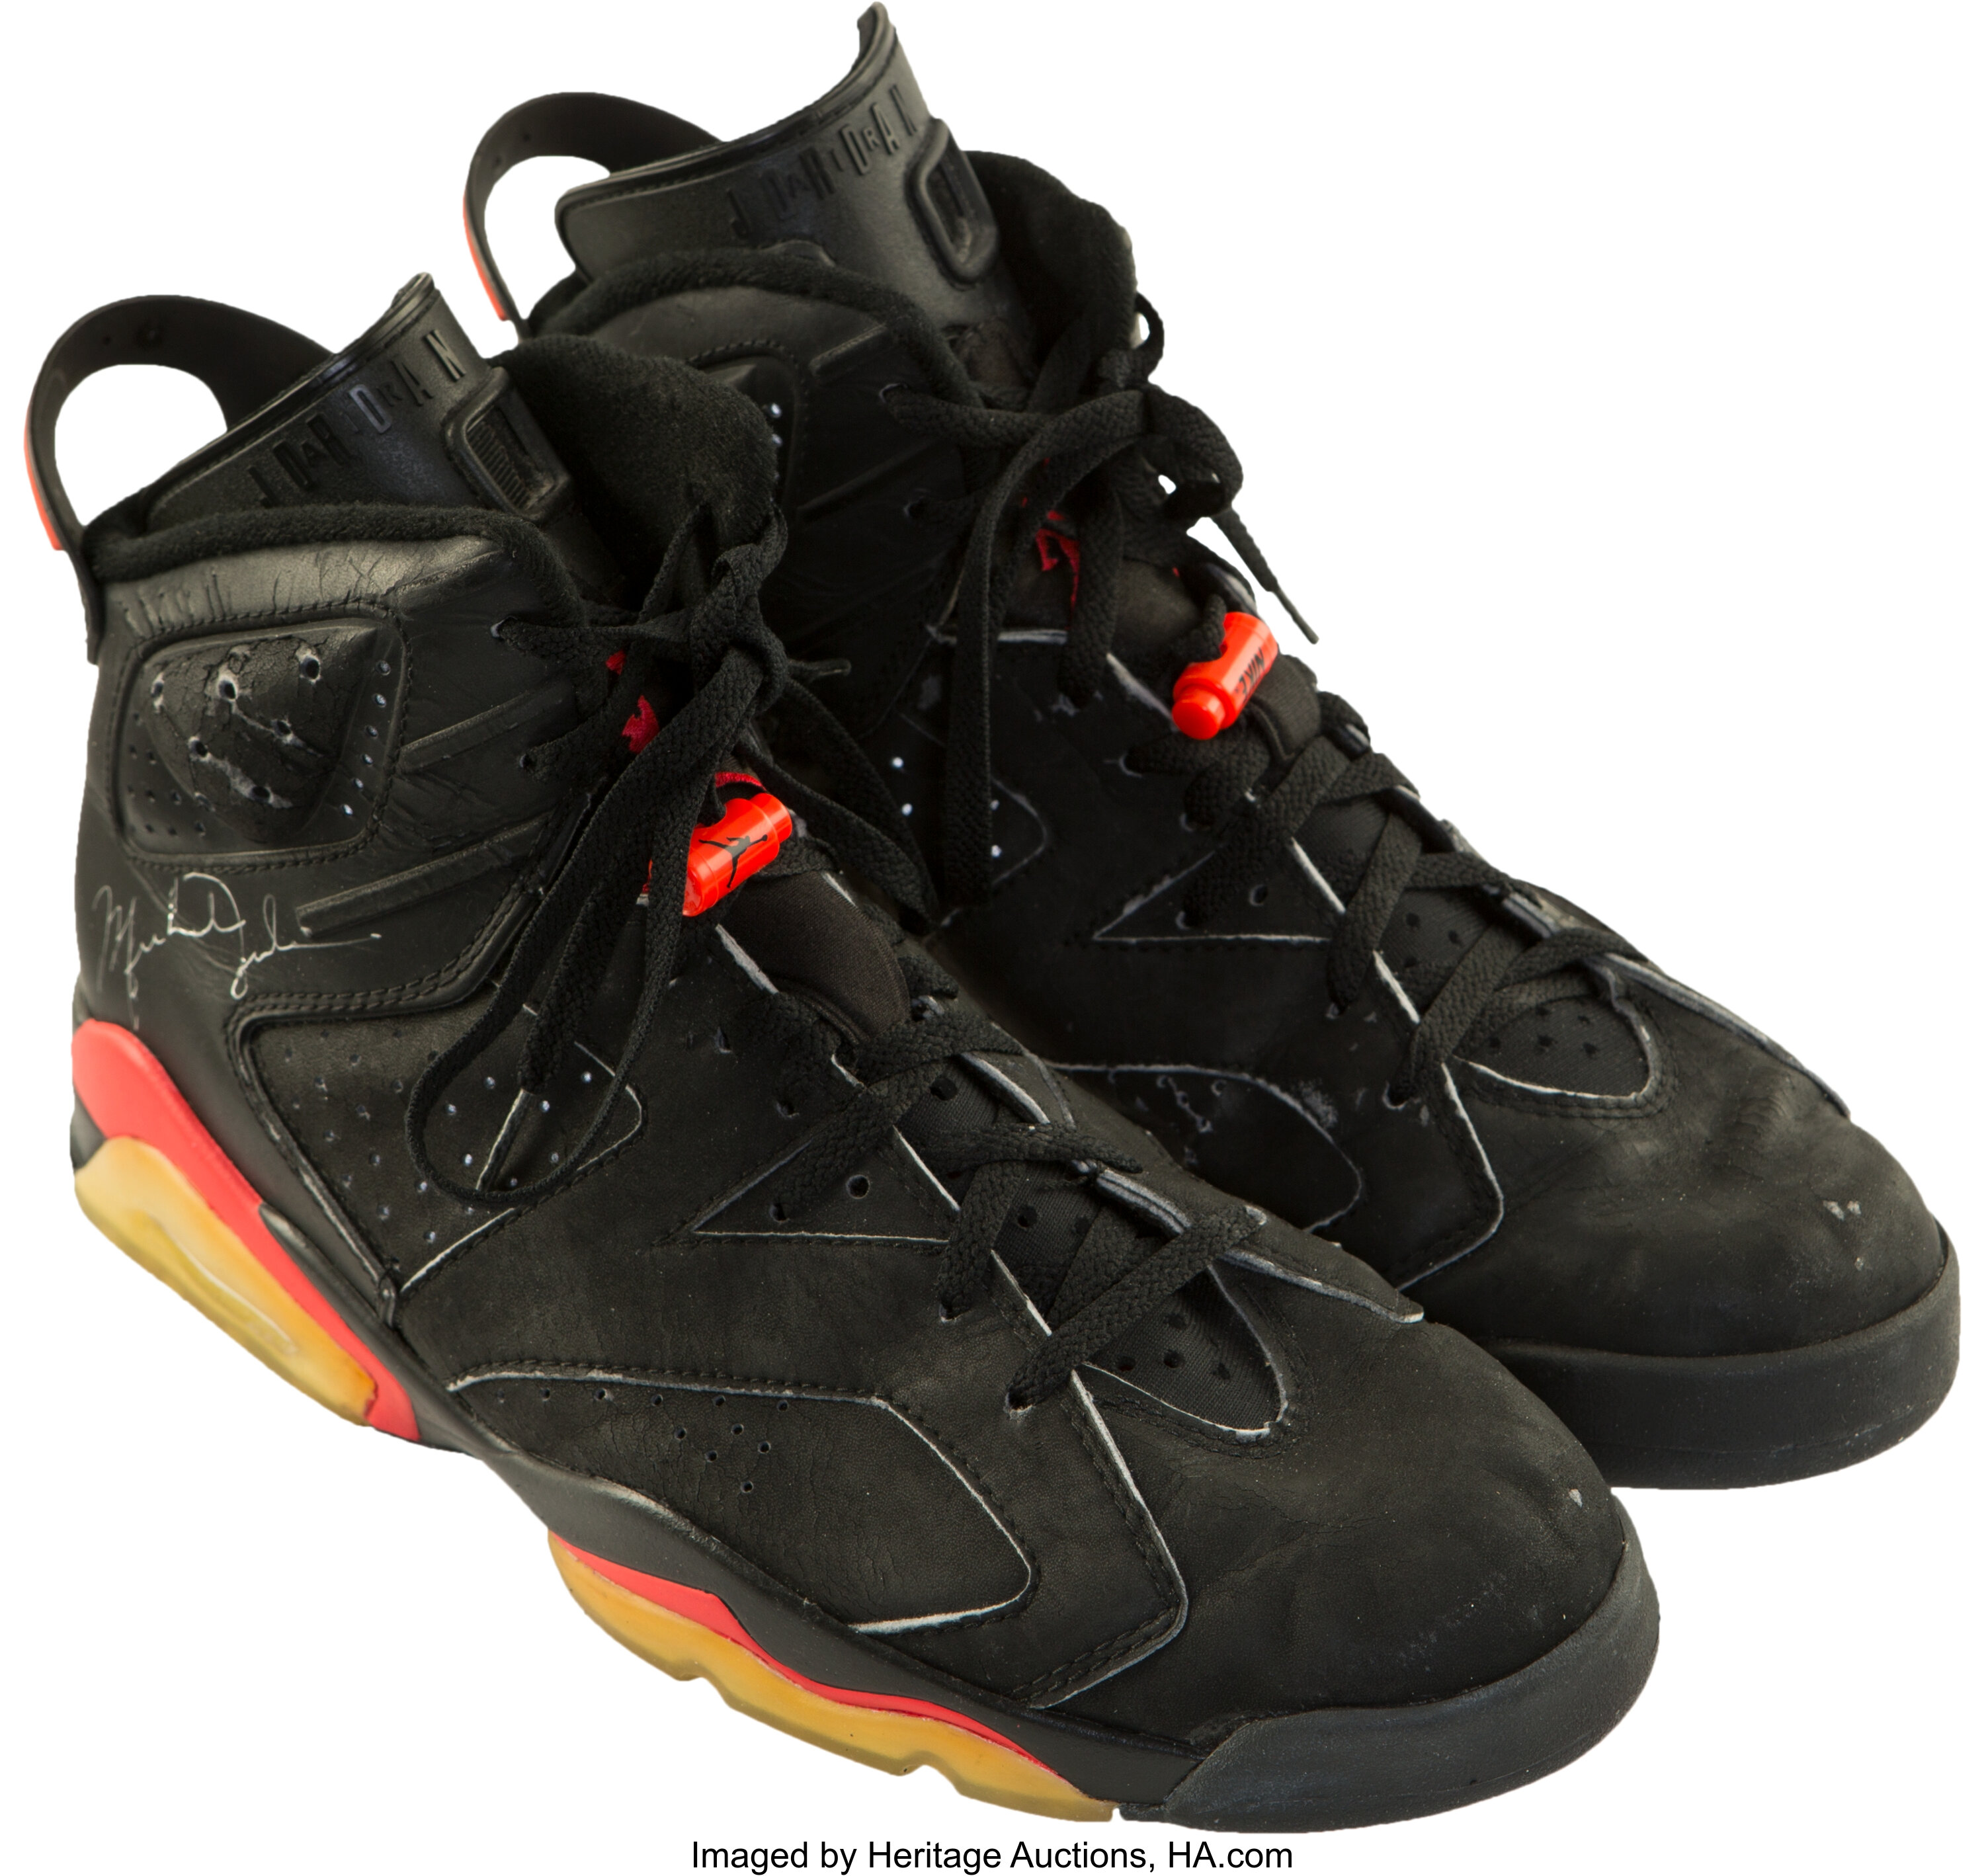 sofa jeg er syg Monica 1991 Michael Jordan NBA Finals Game Worn & Signed Sneakers, MEARS | Lot  #80138 | Heritage Auctions